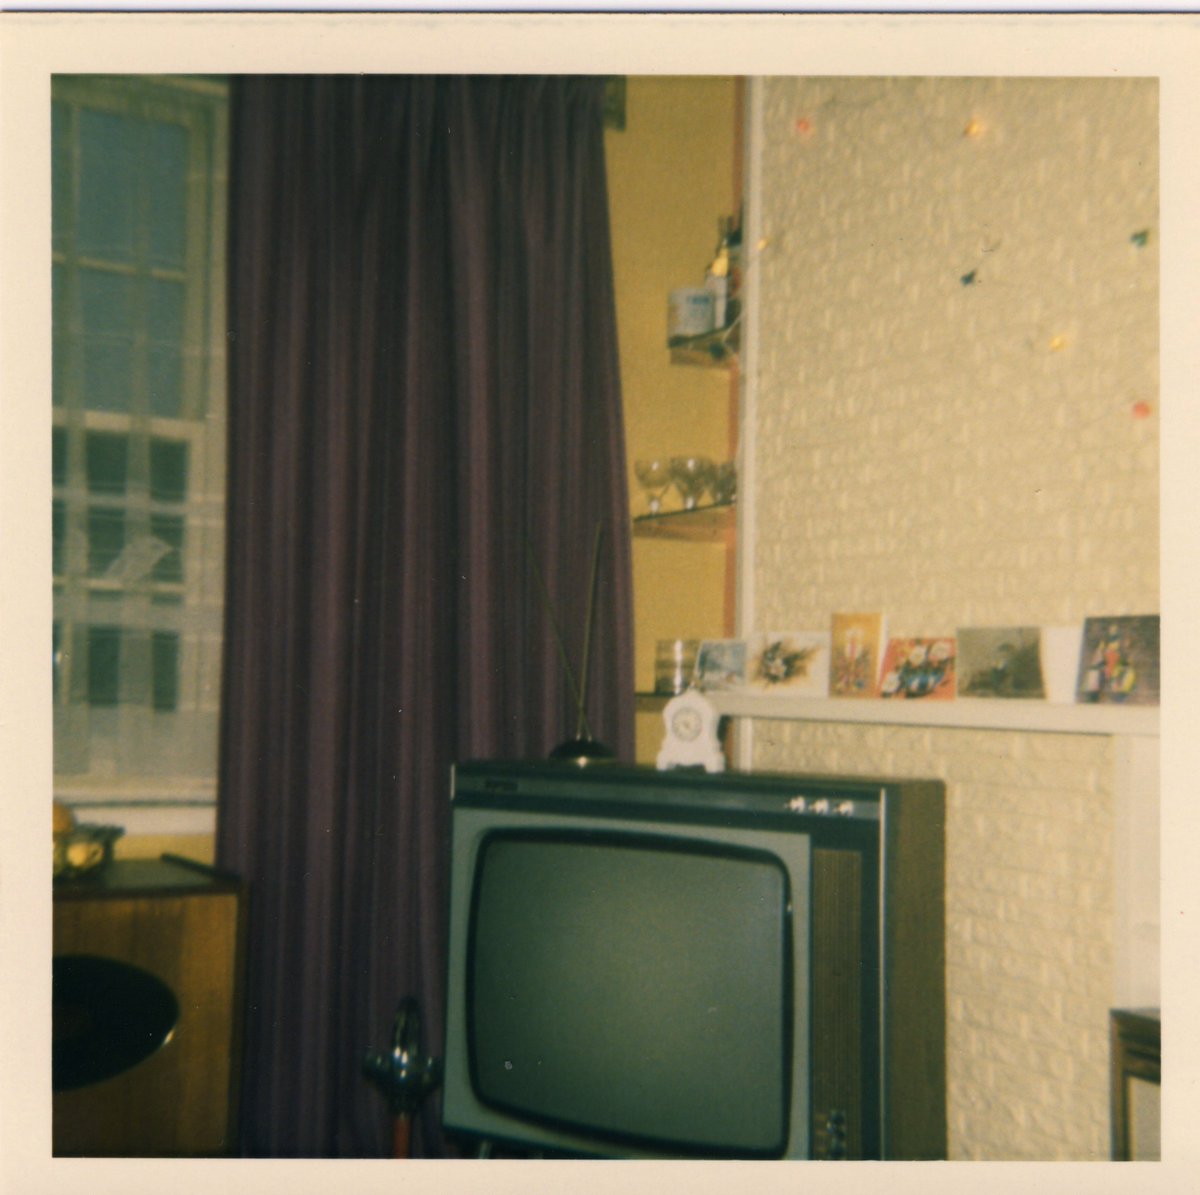 Have a look inside my parent's flat in Mainwaring Court, Armfield Crescemt, Mitcham, in 1977. Using Eric Montague's 1973 photo courtesy of @mertonhistsoc to start off, I narrate my pics of kitchen, hallway and living room. youtu.be/qvdFCm_21qI?si…